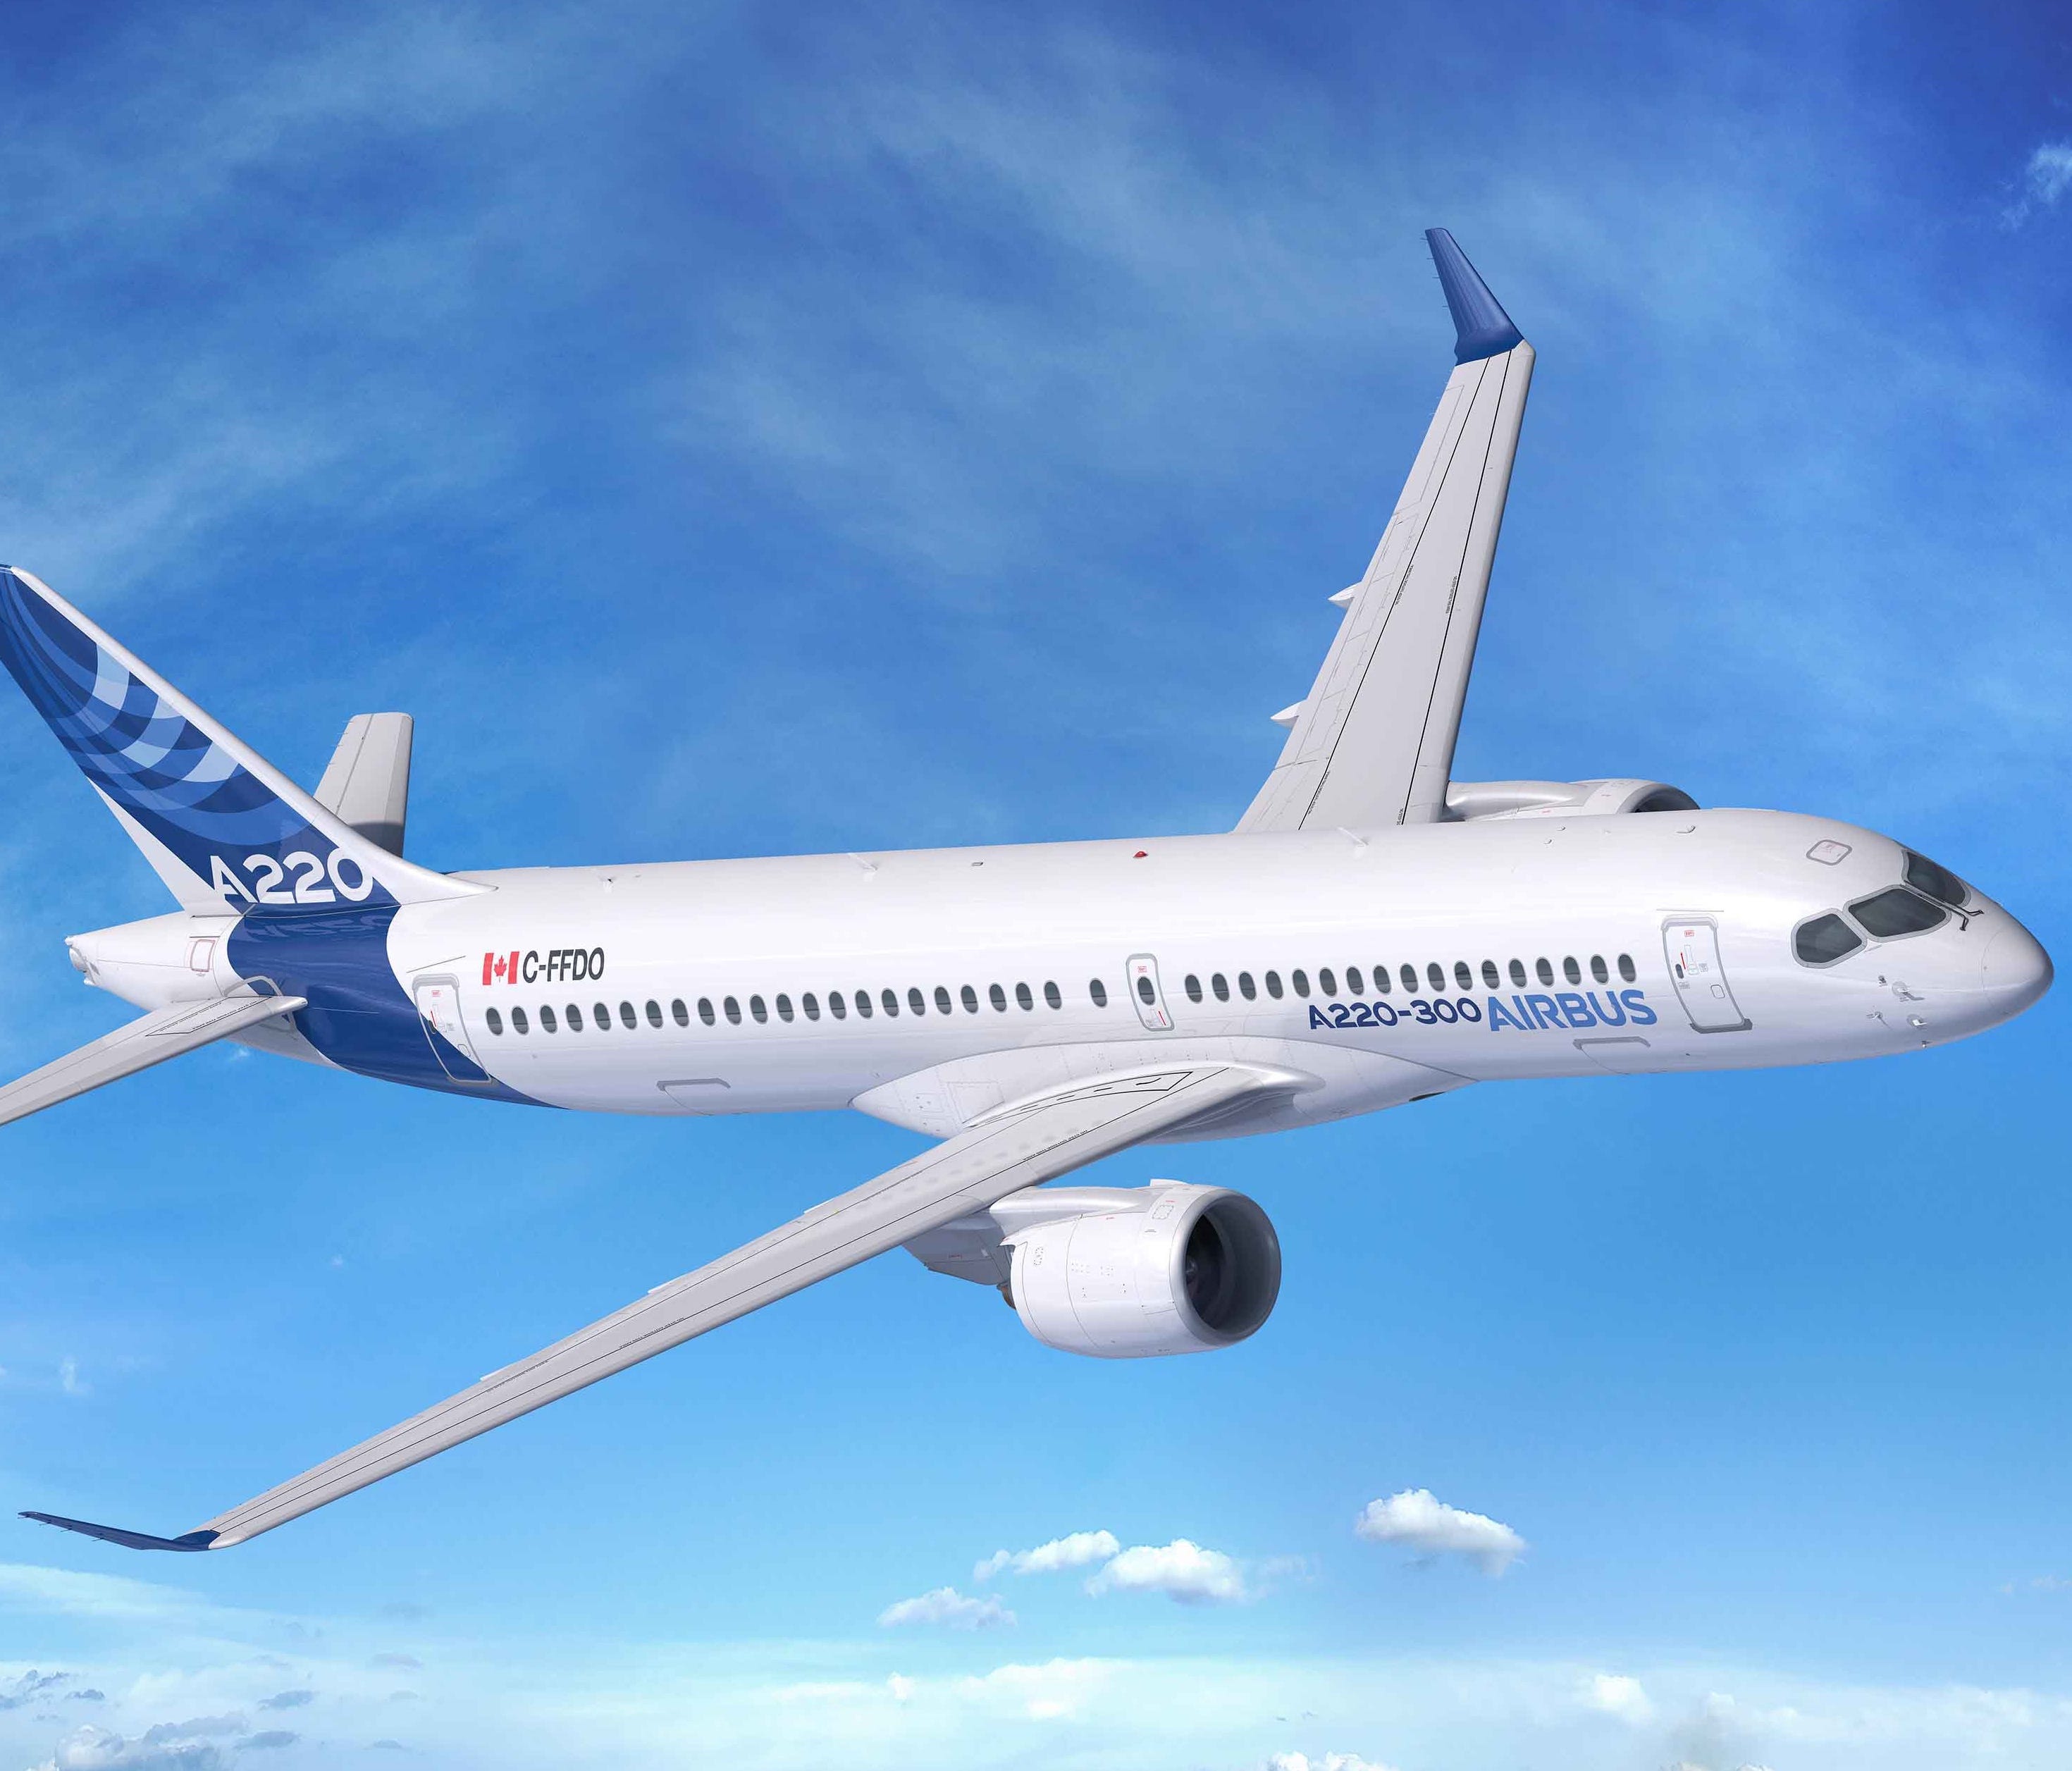 This image provided by Airbus shows an Airbus A220-300 in flight. The plane has been ordered by JetBlue founder David Neeleman for a new U.S. start-up airline.